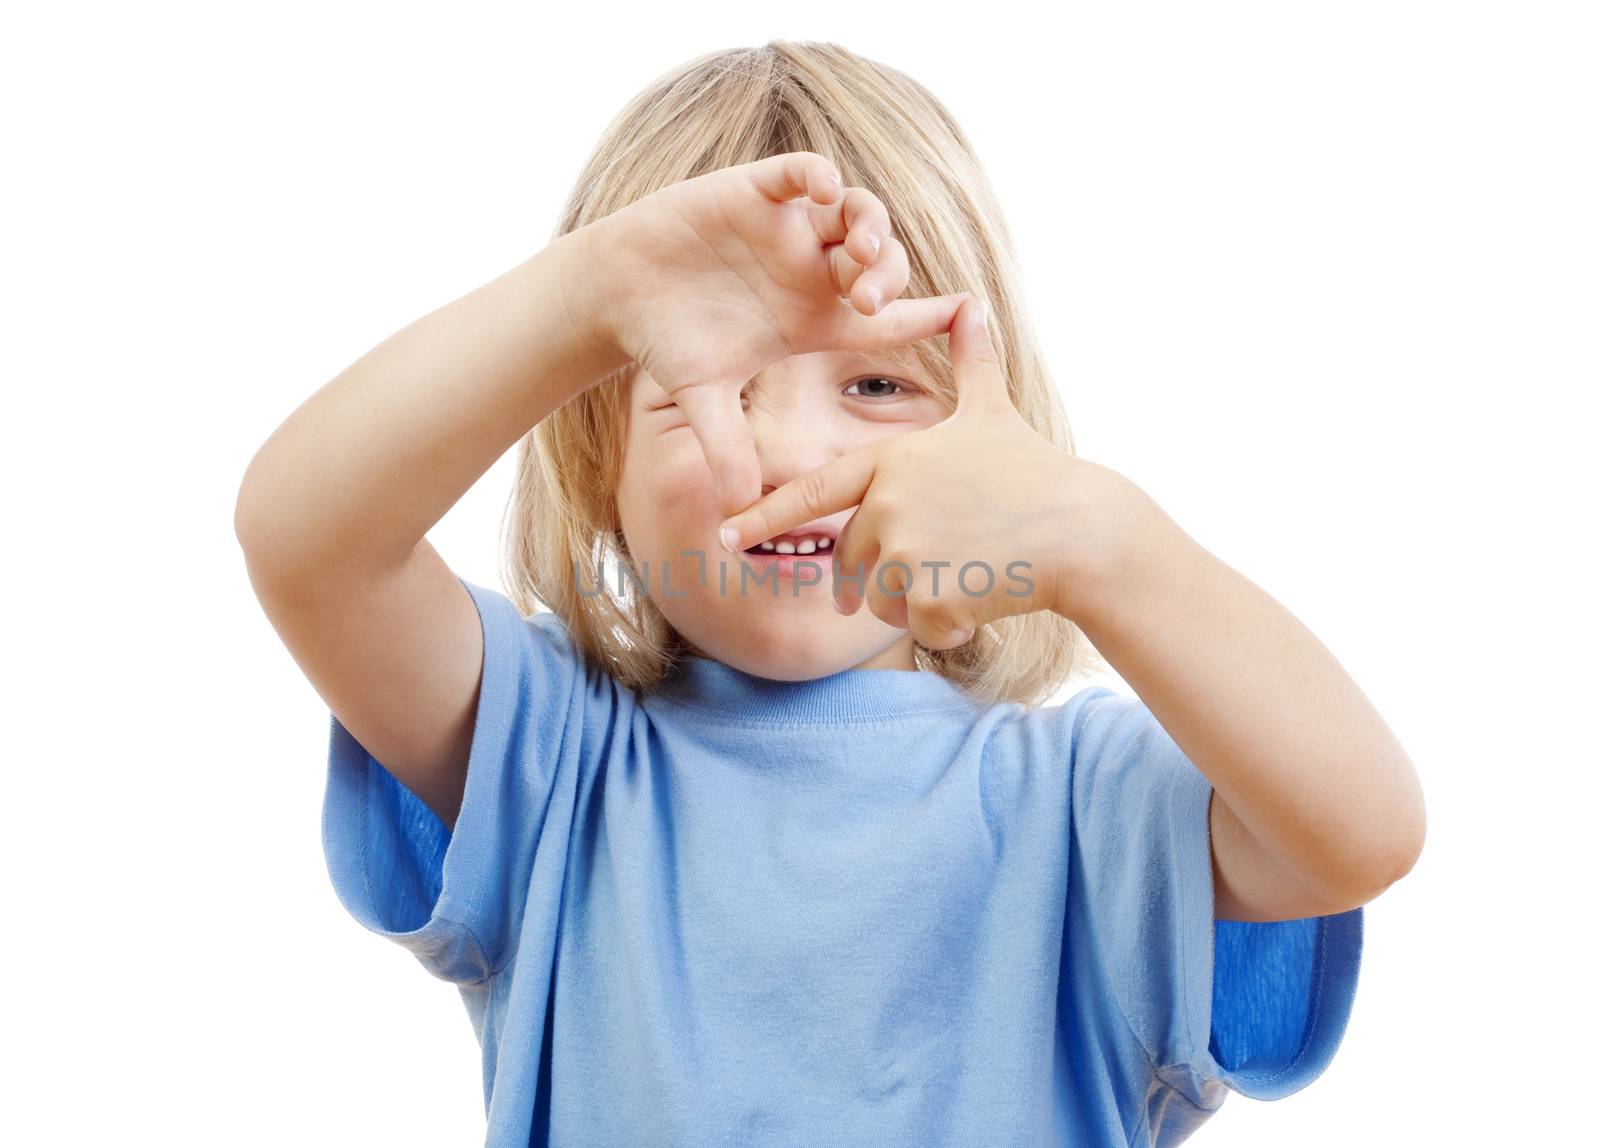 little boy with long blond hair looking through a finger frame - isolated on white